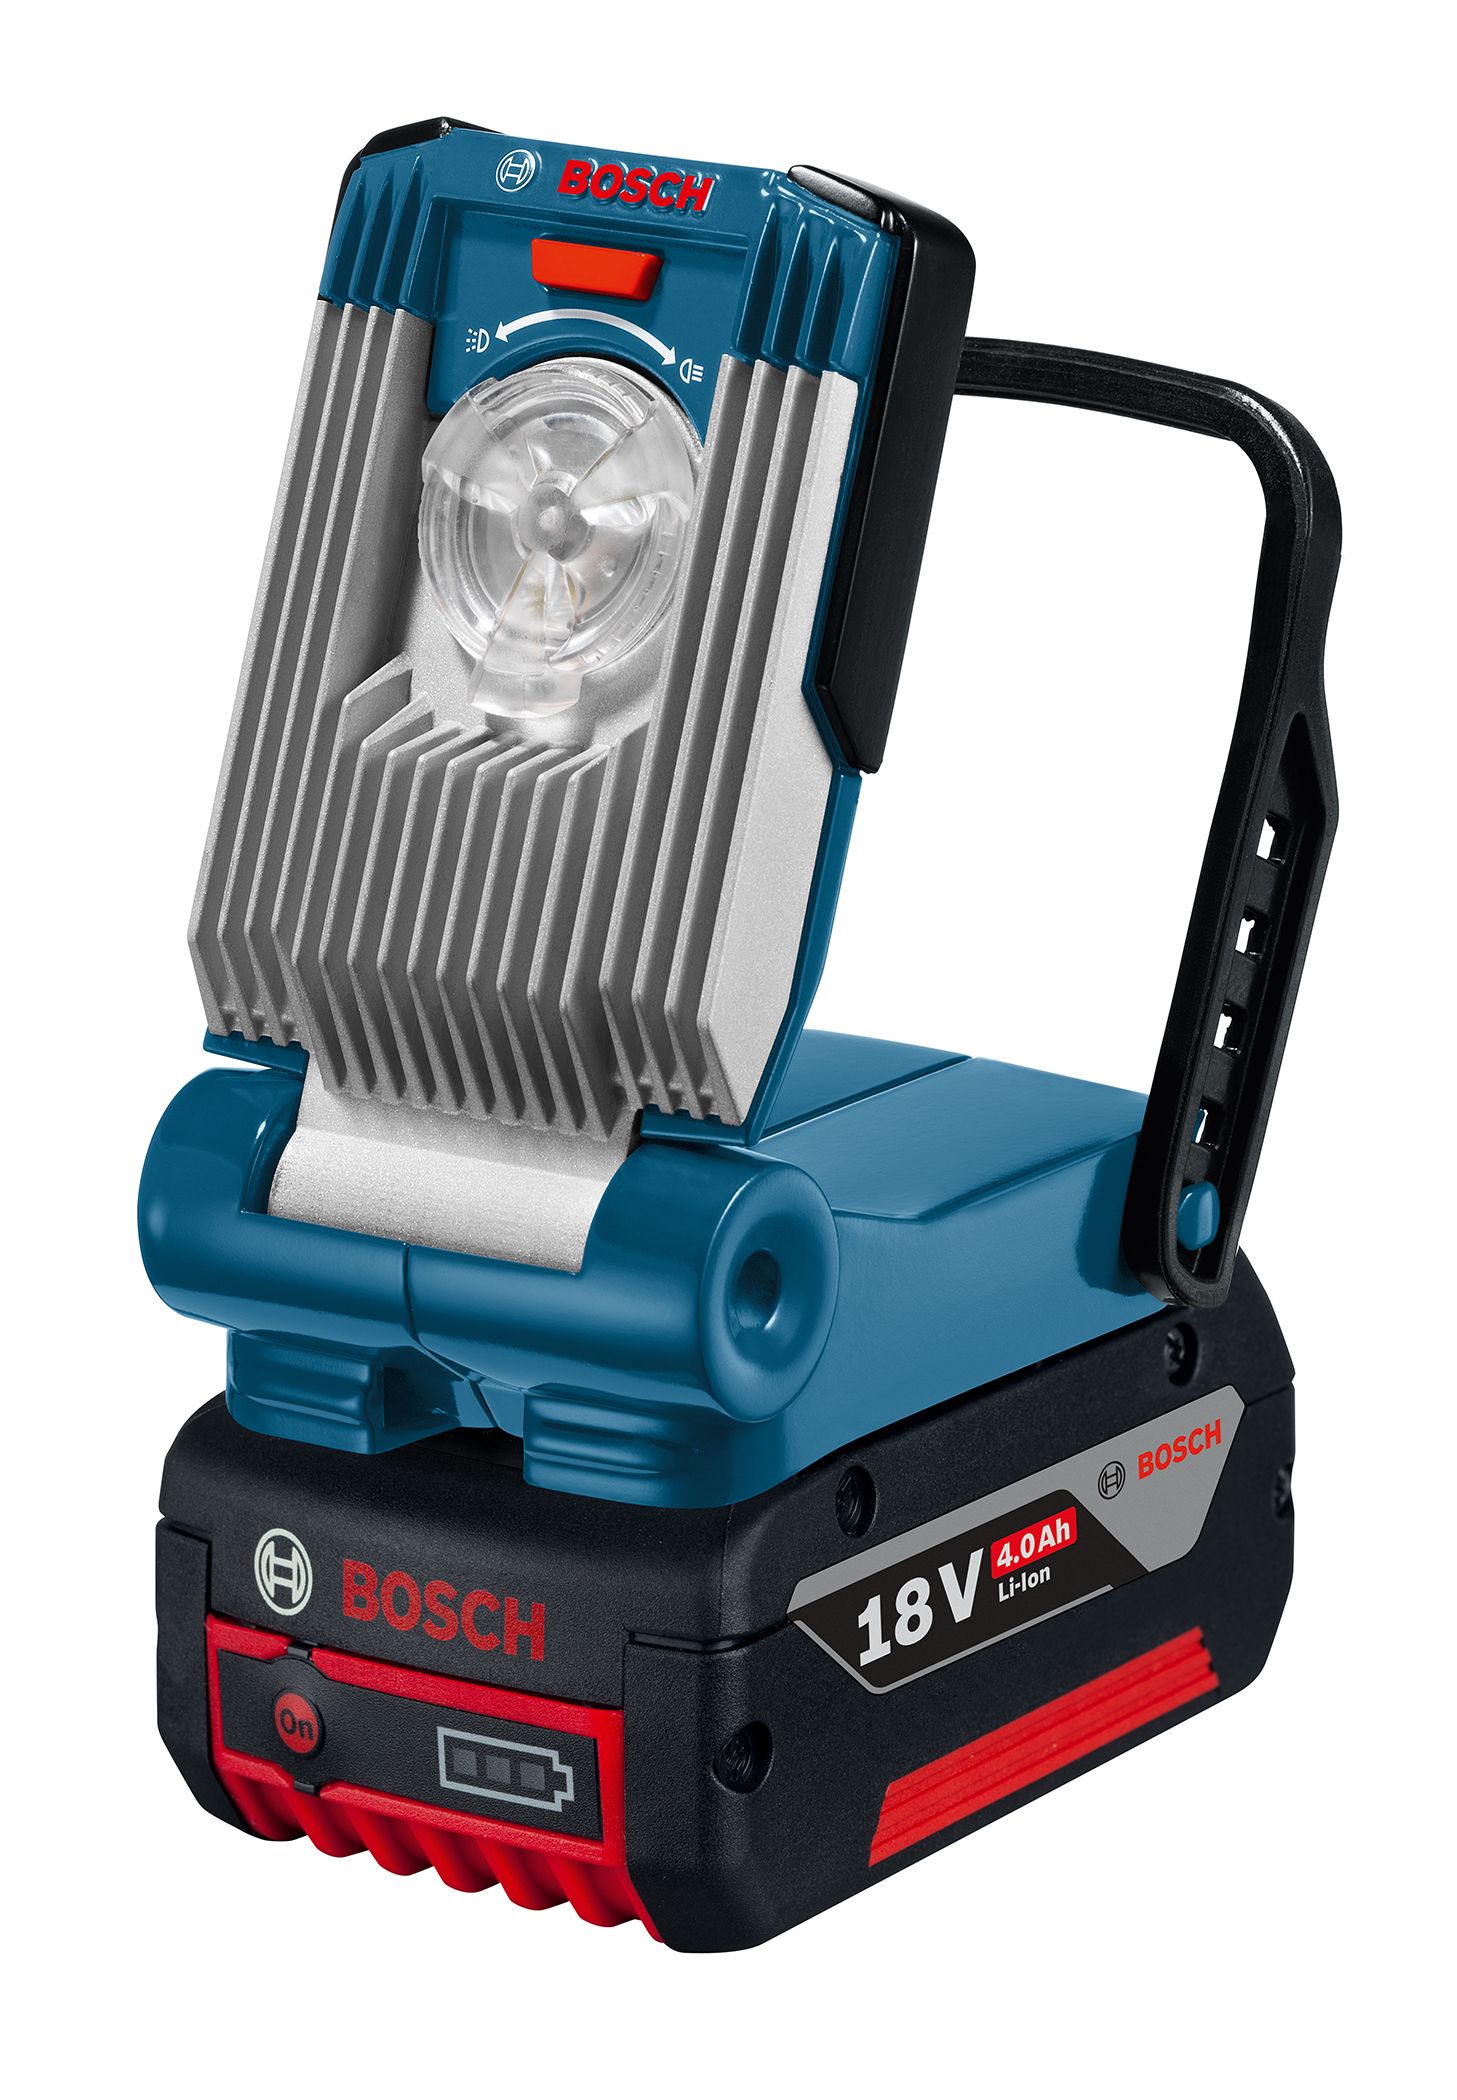 borstel rijk peper Bosch LED Work Light Plugs Into the Battery You Already Have